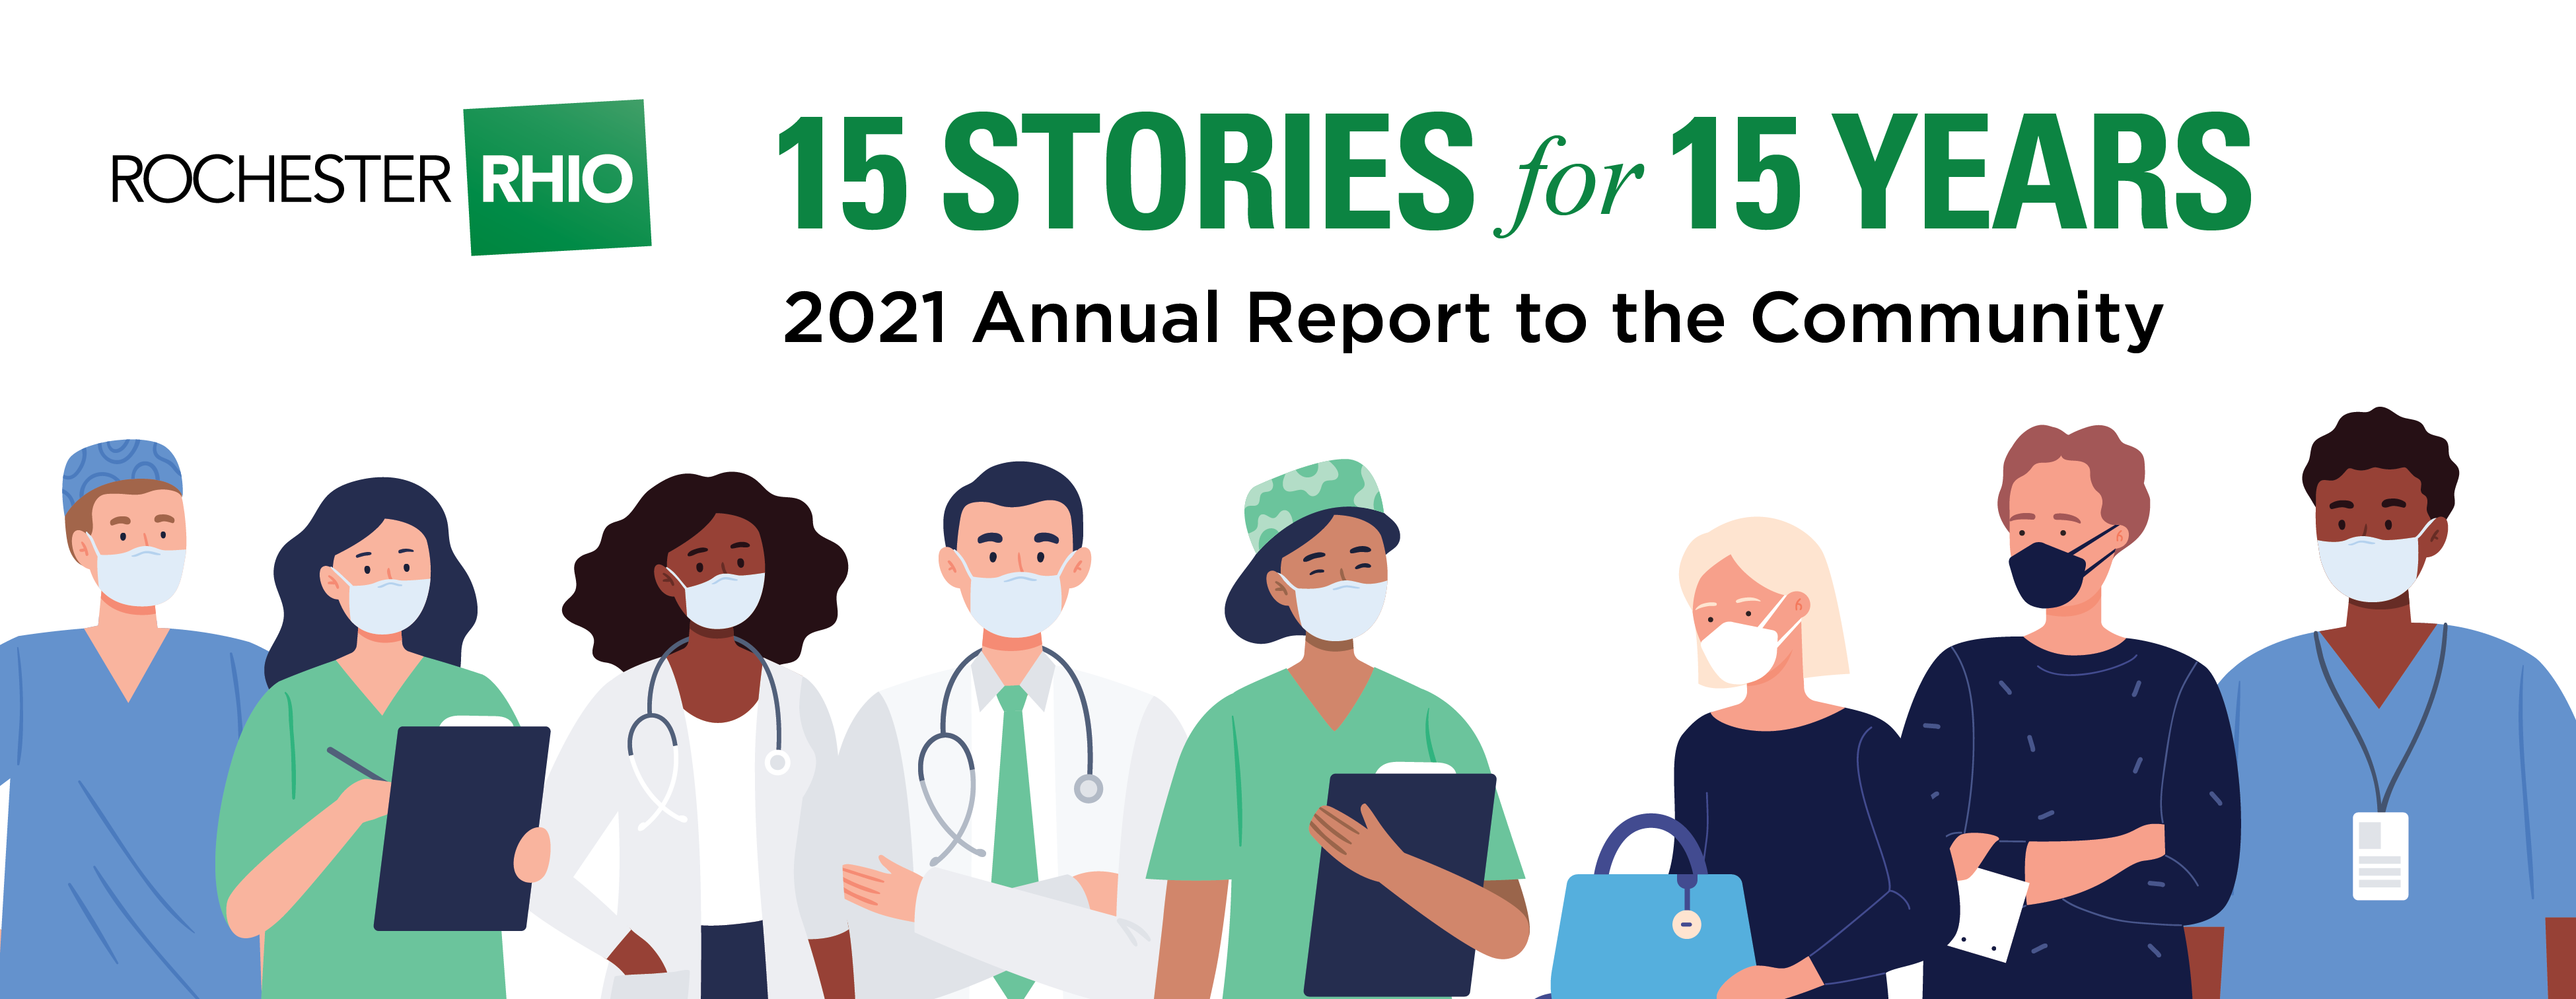 2021 Annual Report: 15 Stories for 15 Years